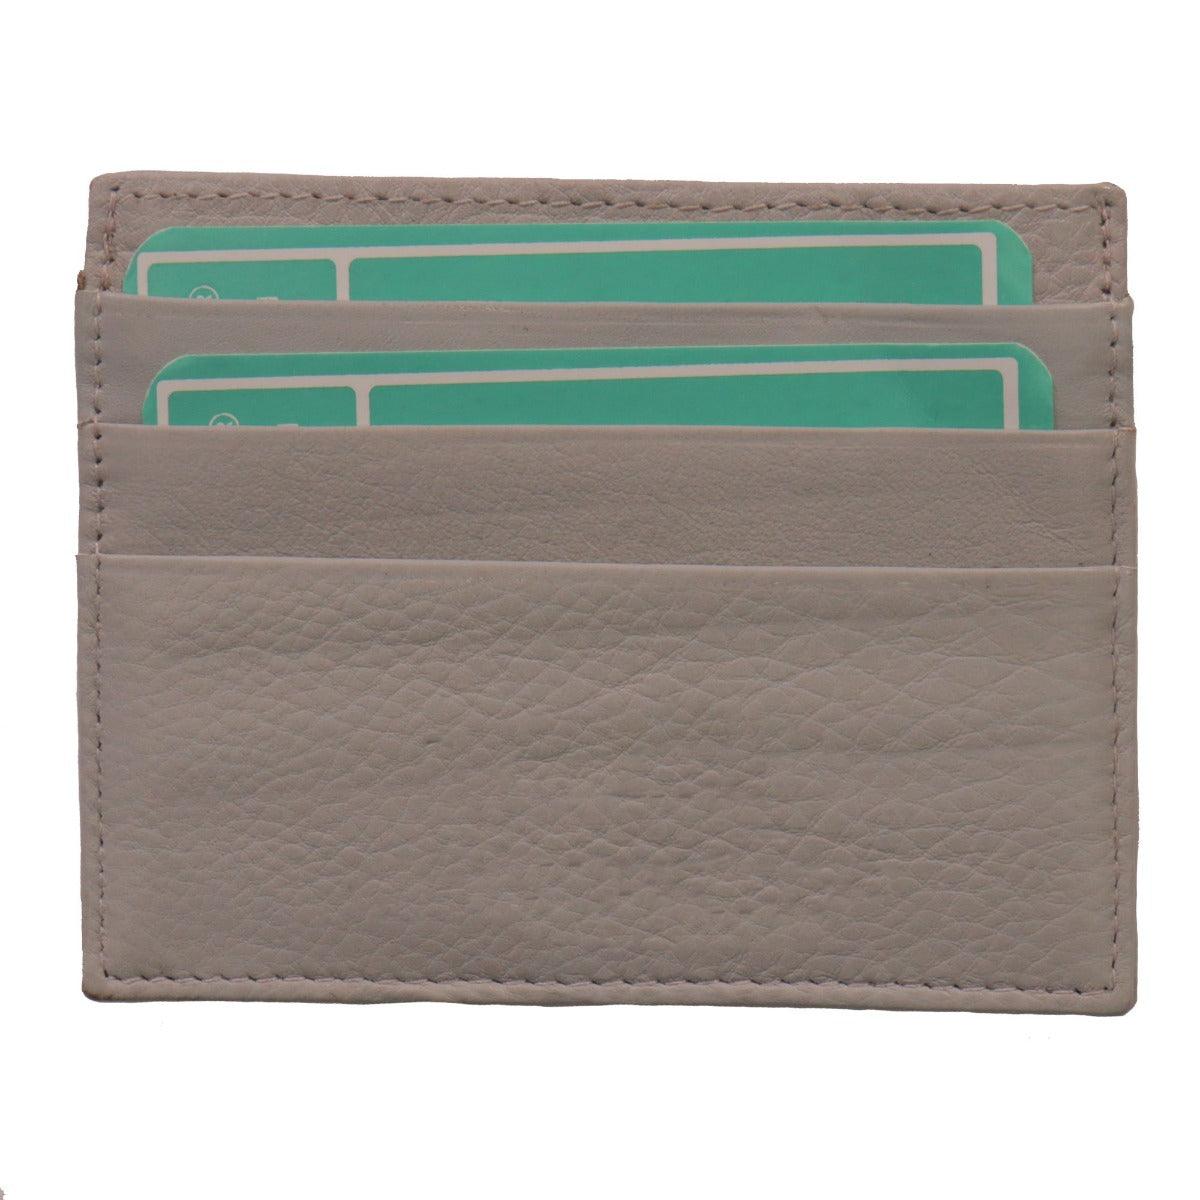 Hot Leathers Grey Credit Card Holding Wallet - American Legend Rider